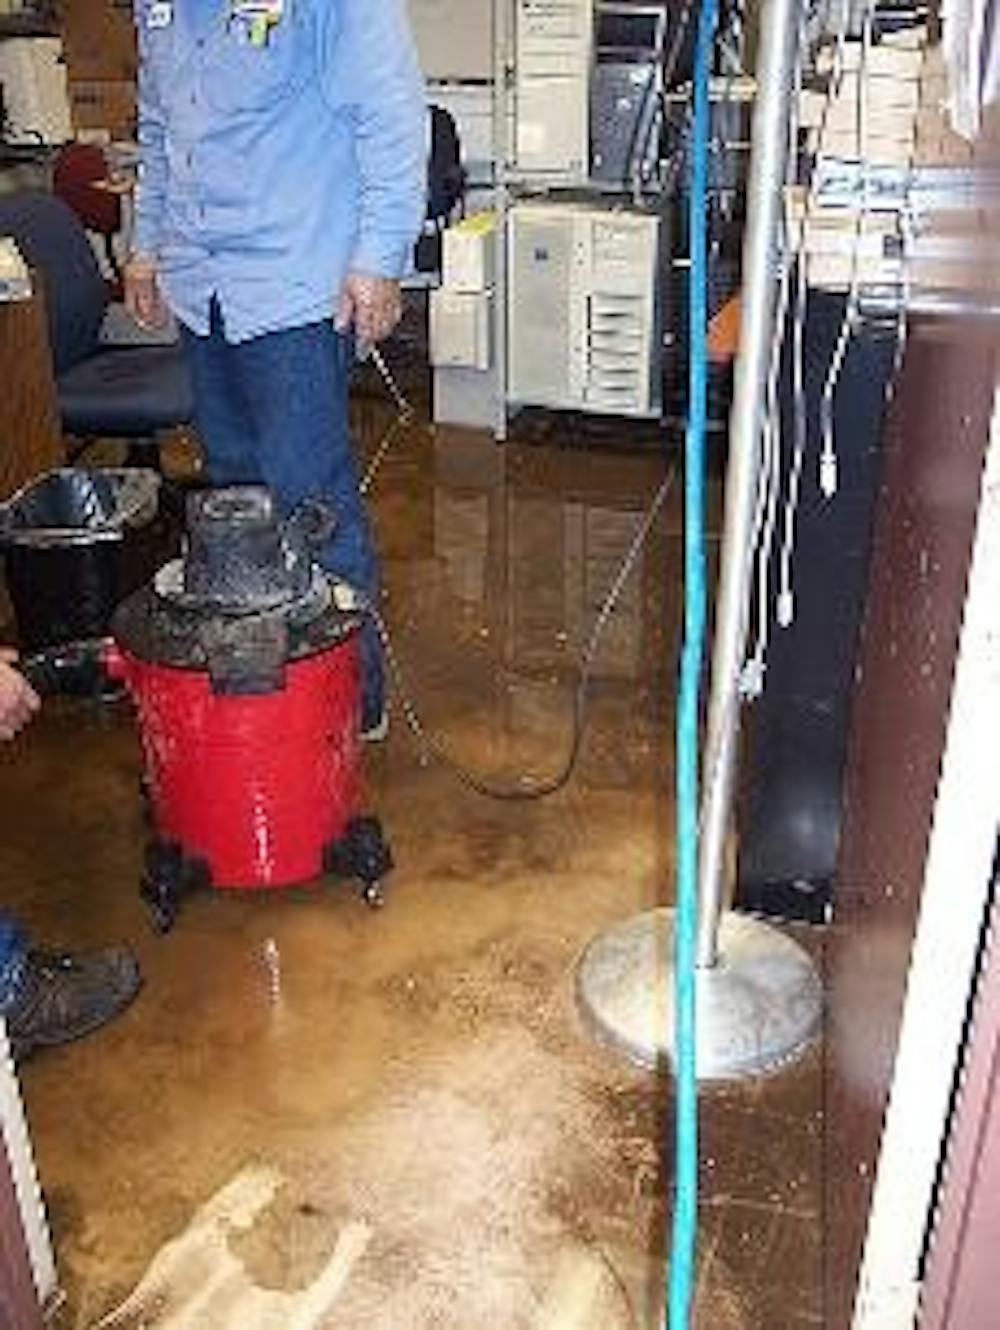 SOAKED - Pipe bursts in the basement of McKinley building nearly ruining $70,000 worth of audio equipment. This was not the first time the basement was flooded, but previous damage was only due to rain water. 